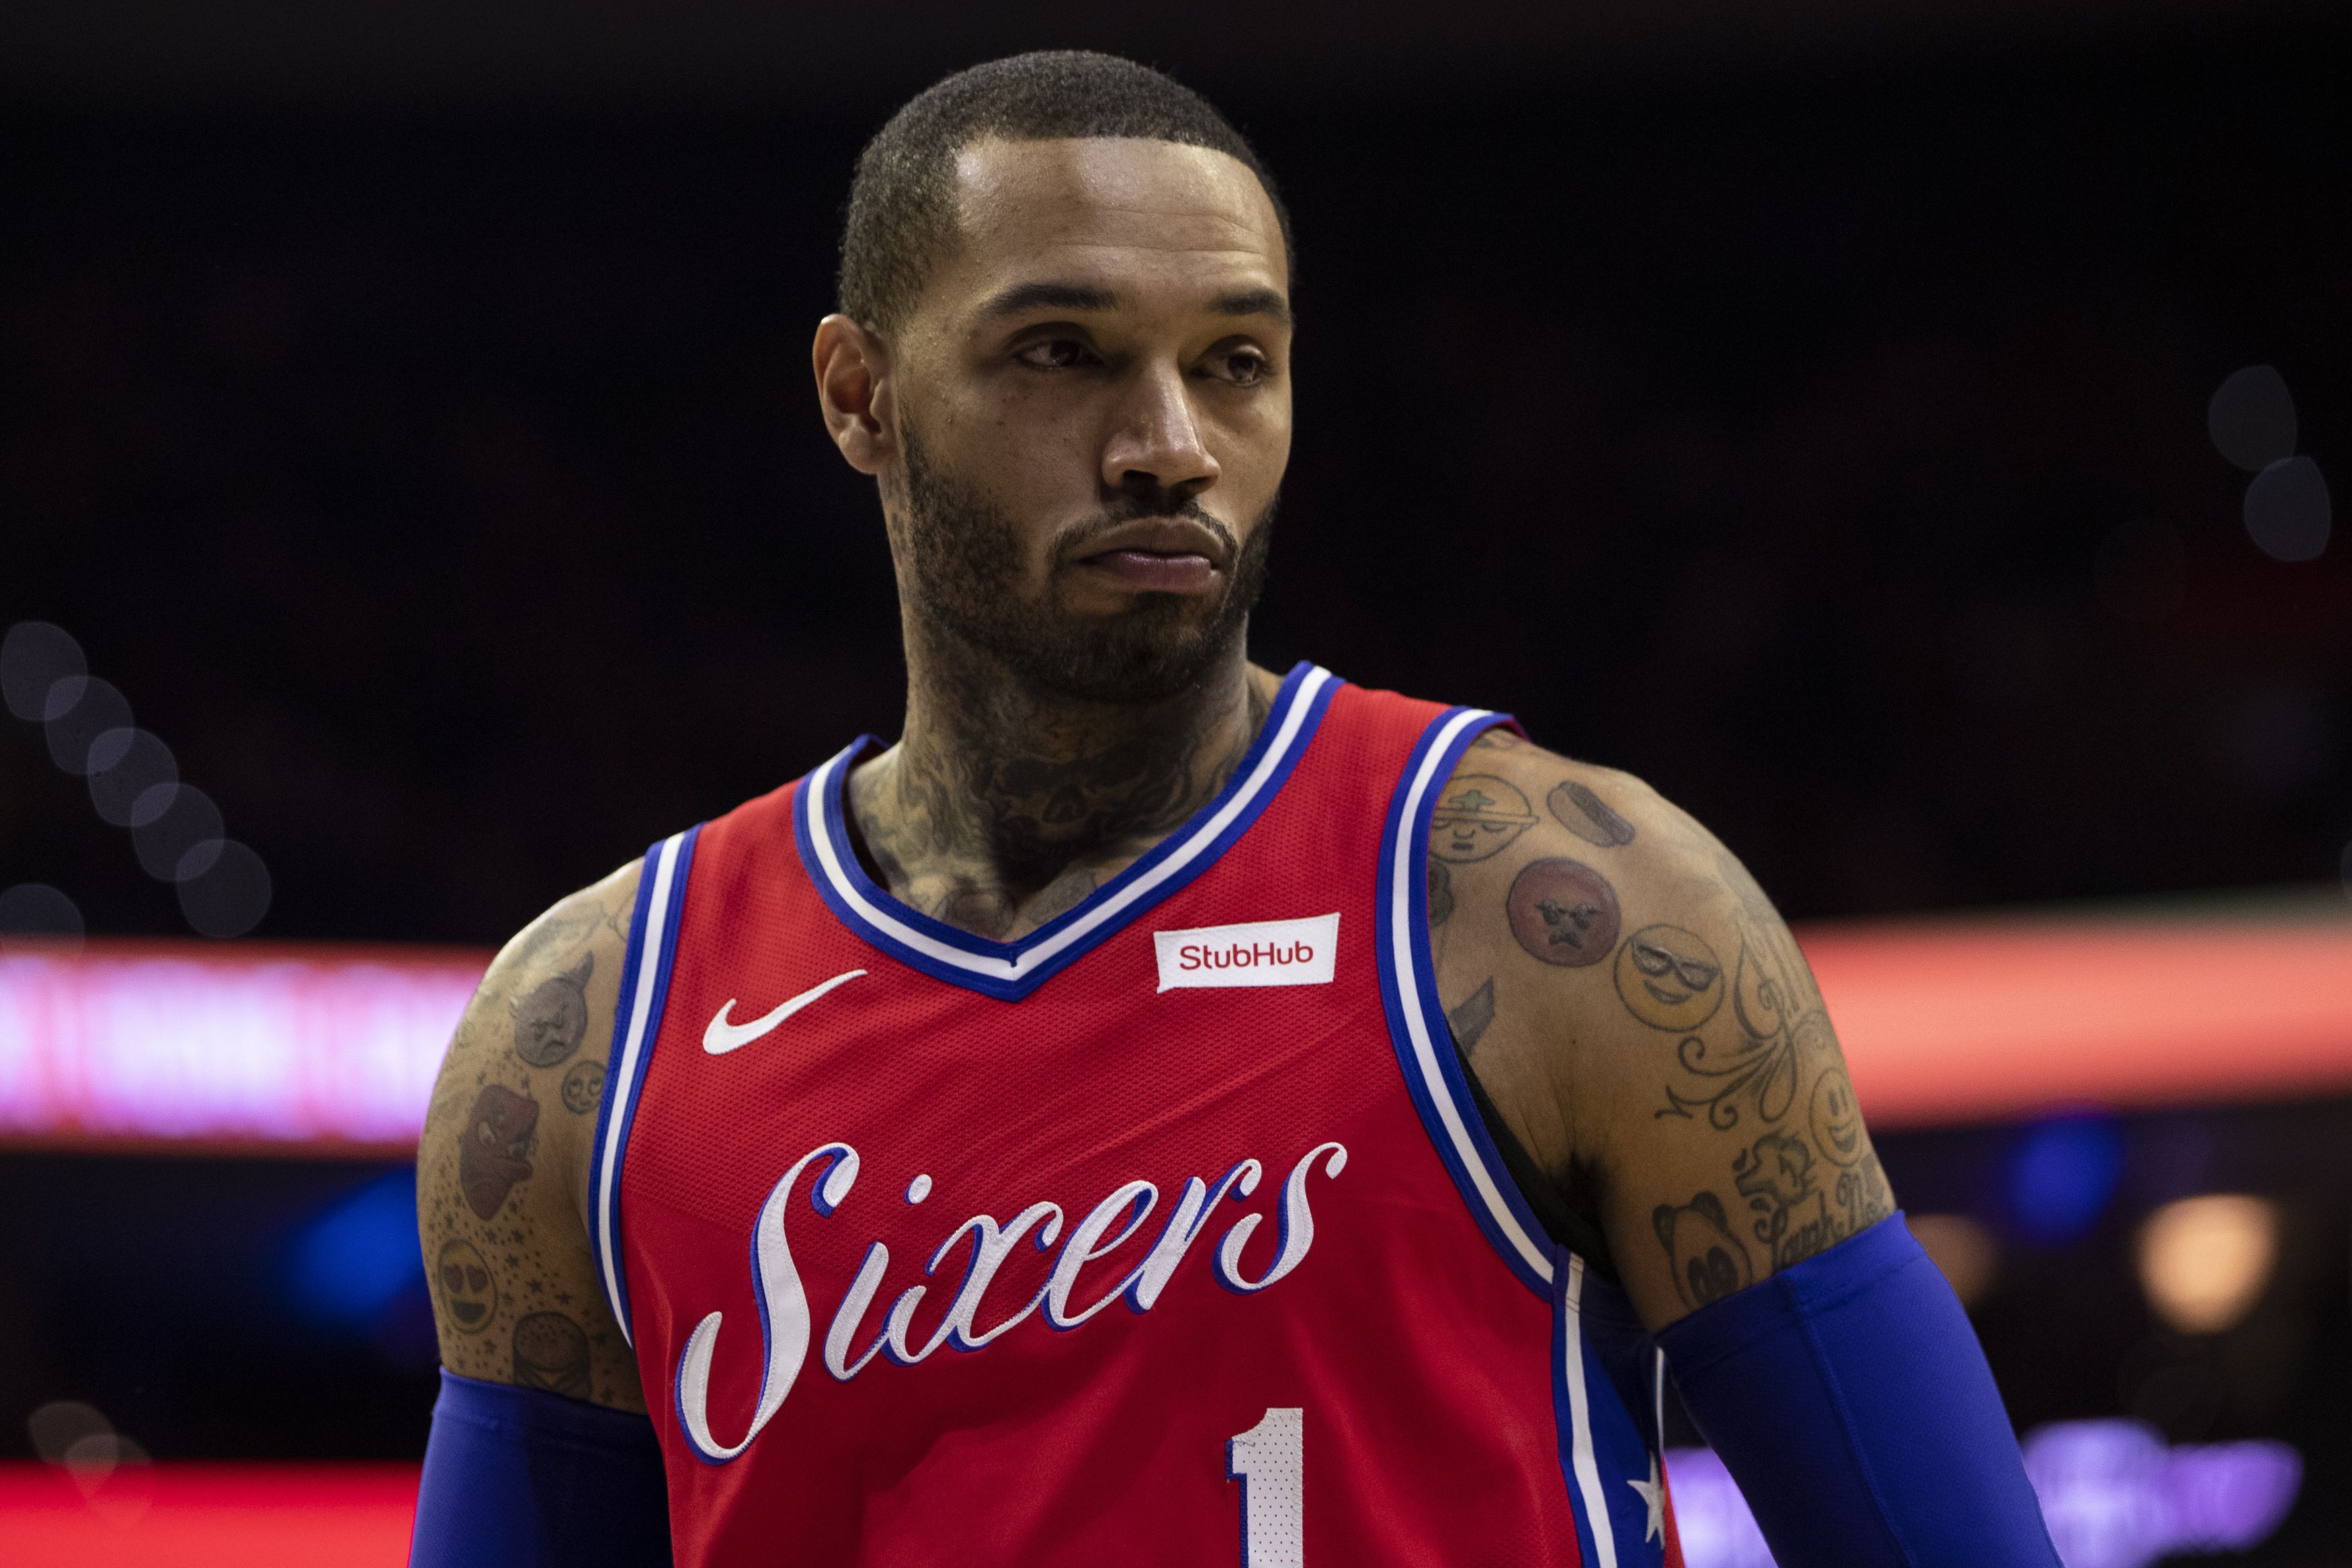 New Video Of Eagles Fans & 76ers Player Mike Scott Getting Into Fist Fight  Emerges (WATCH)